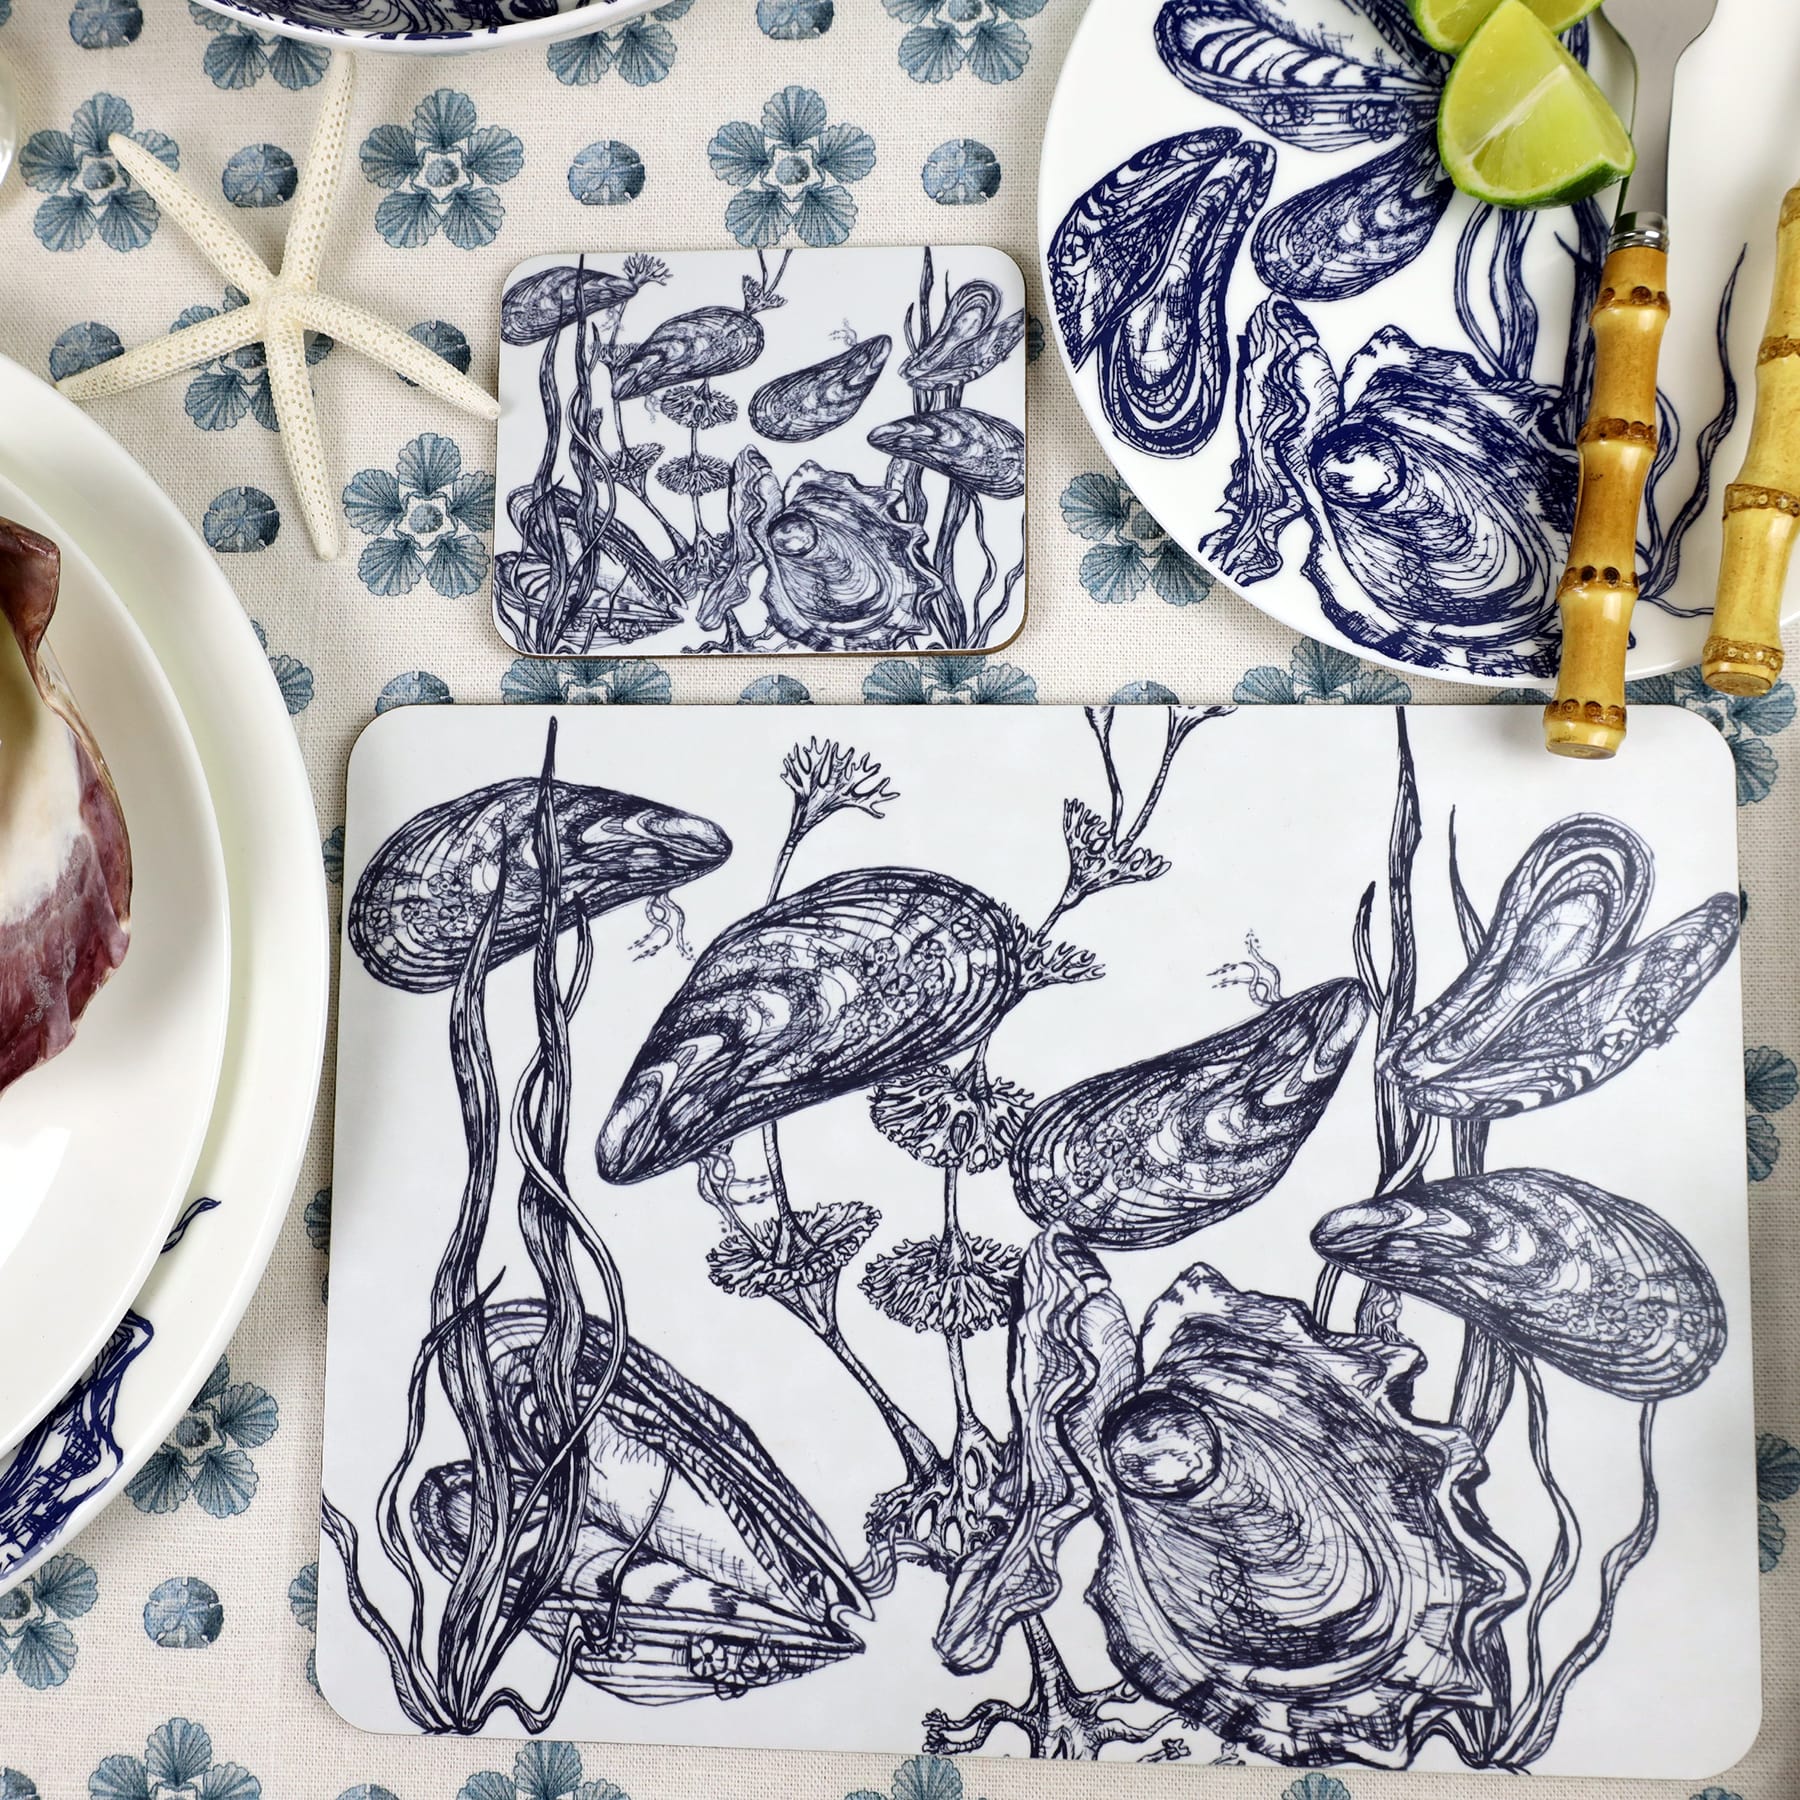 Mussel and Oyster Design in Navy on a white Coaster with a matching Placemat on a Seastar printed tablecloth,also on the table are other tableware